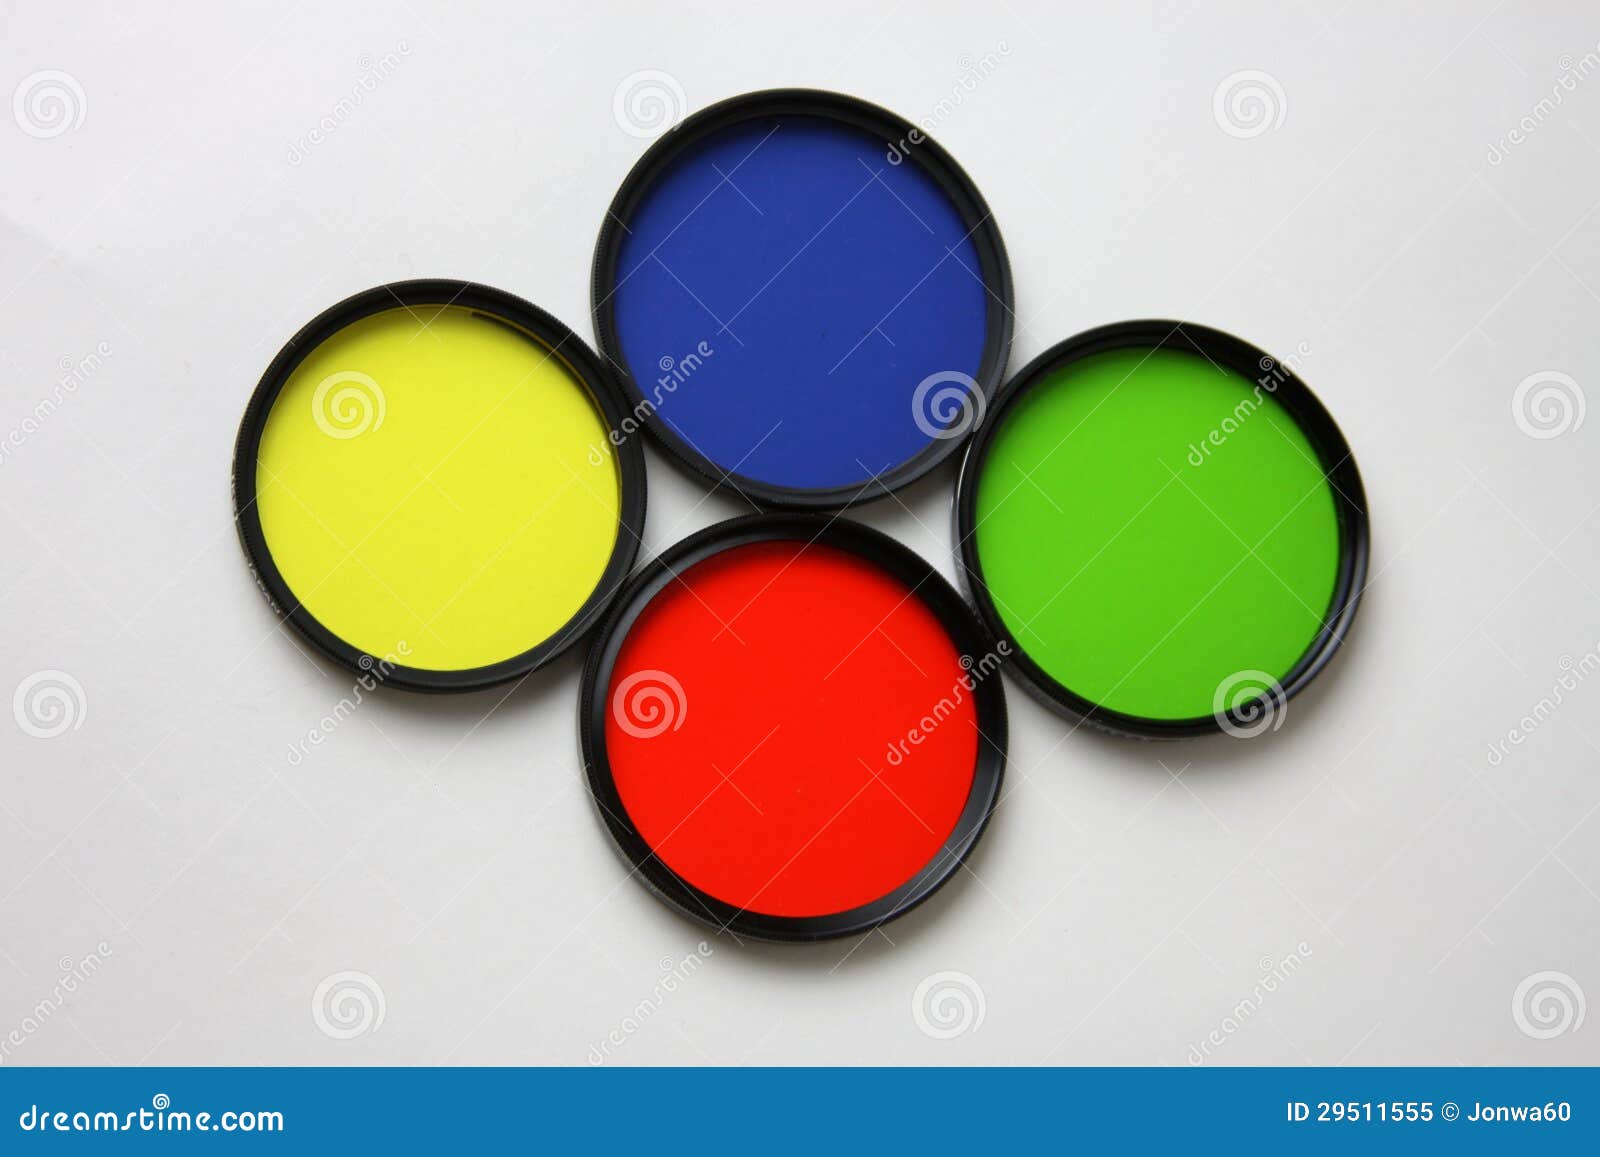 filters, red, yellow, blue and green